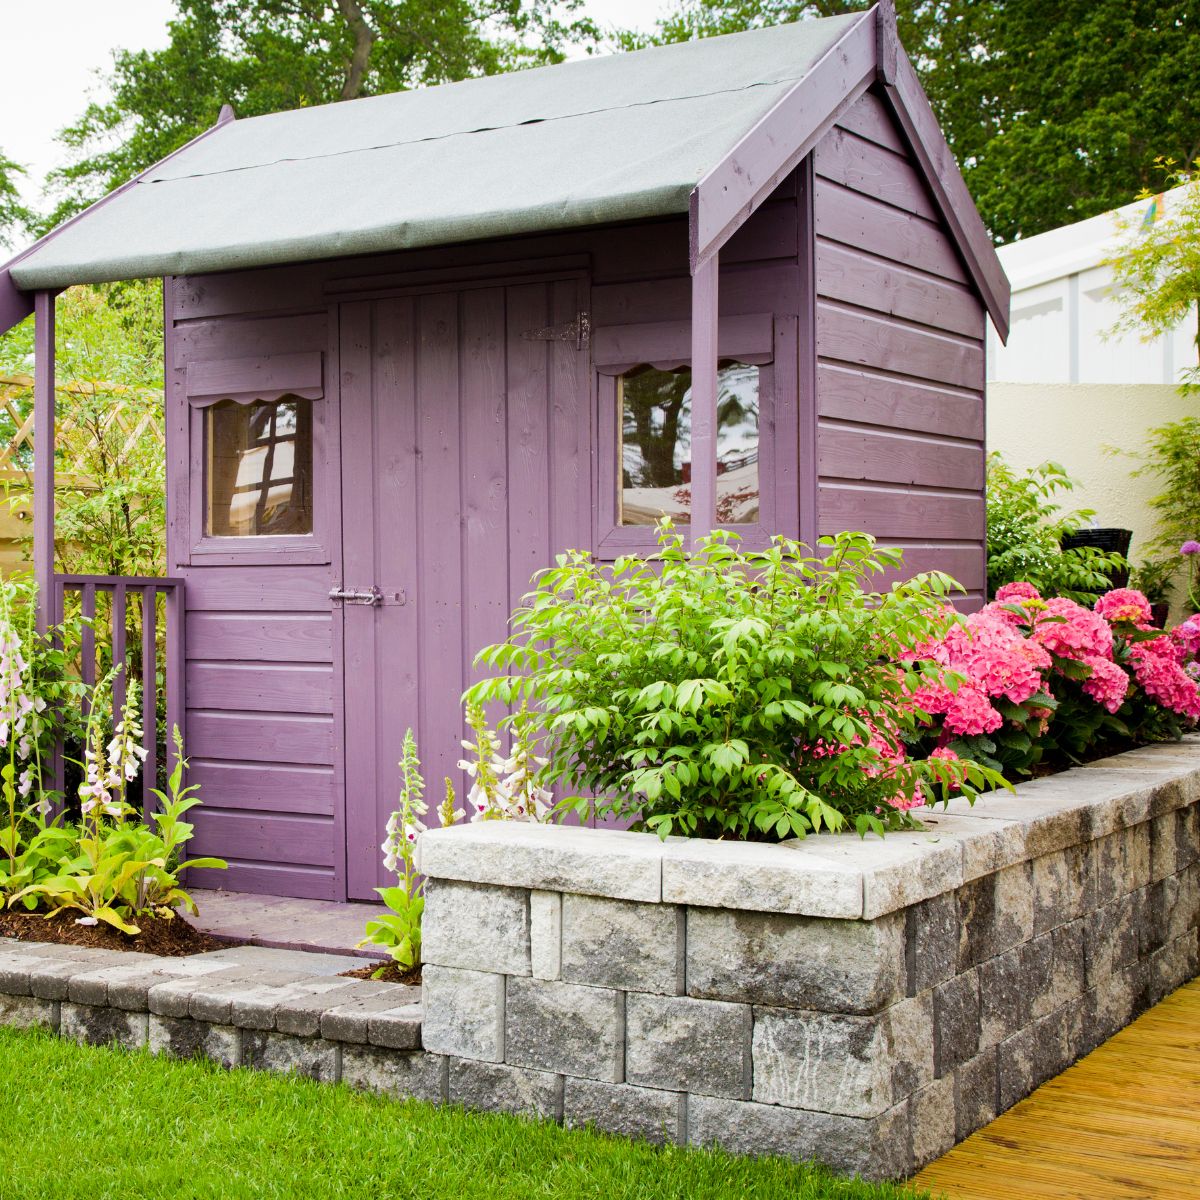 A lavender colored shed, with a stone retaining wall and some pink hydrangea flowers.